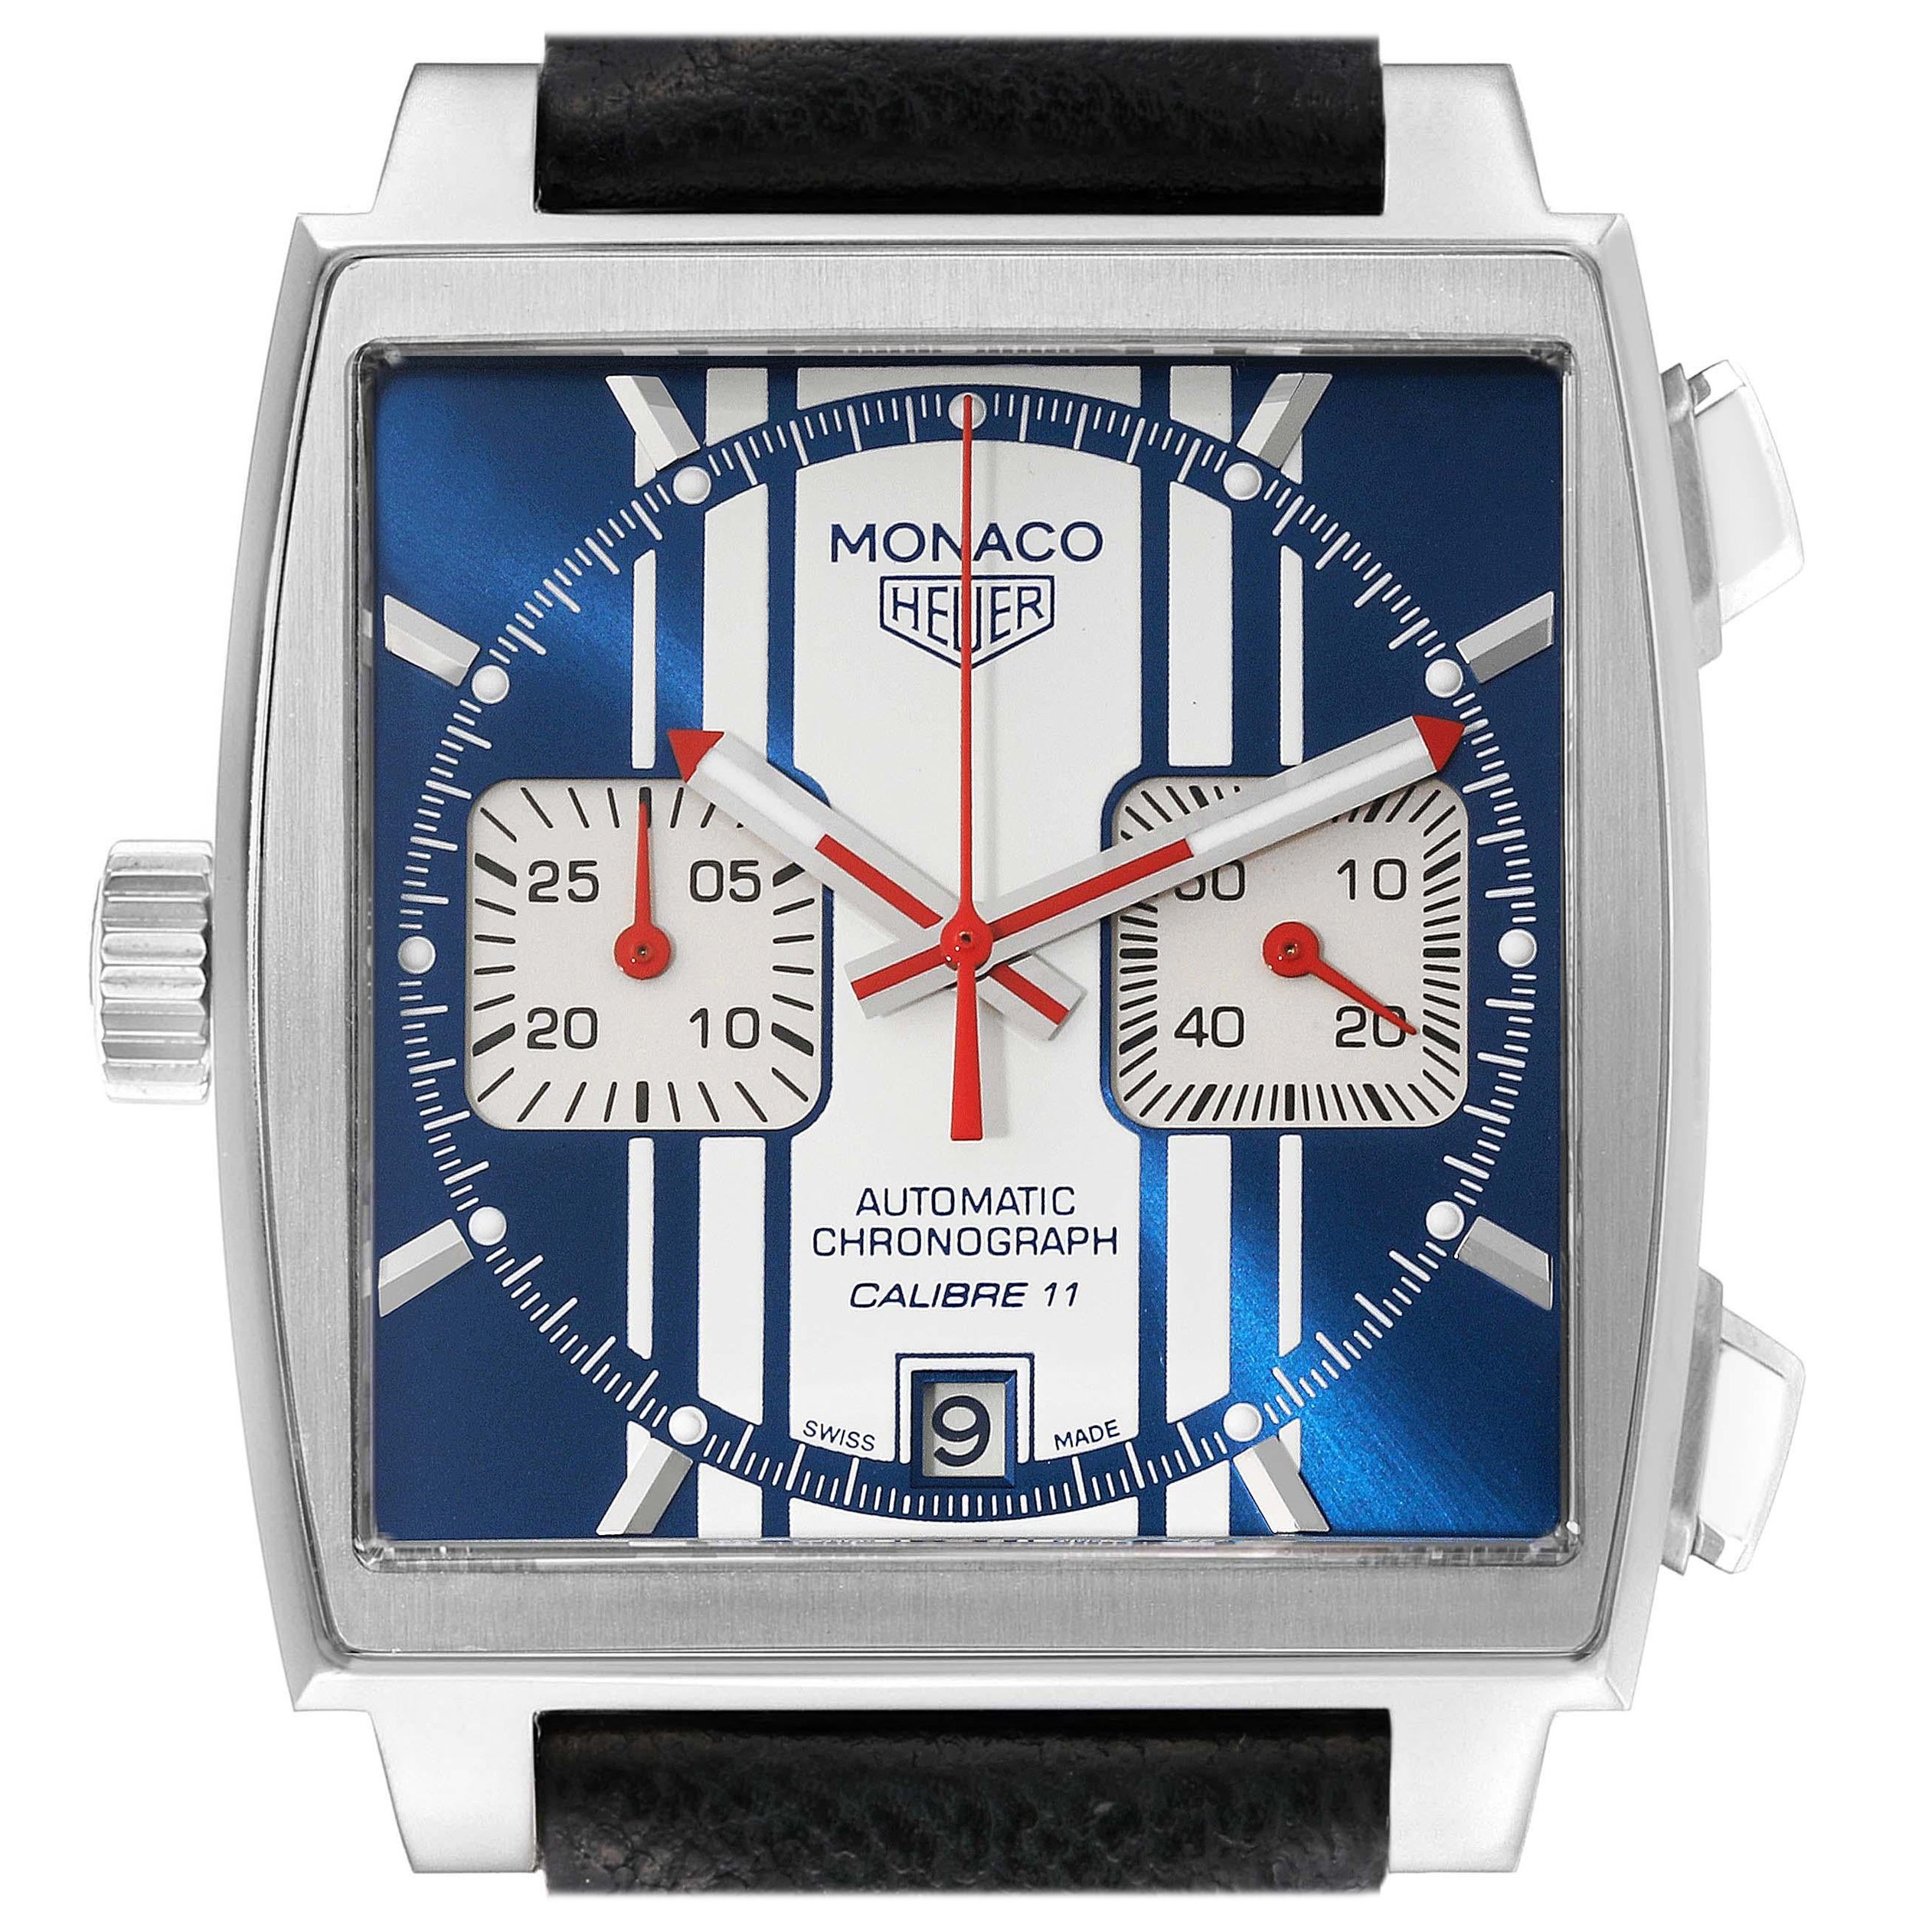 Tag Heuer Monaco McQueen Limited Edition Steel Mens Watch CAW211D Box Card For Sale